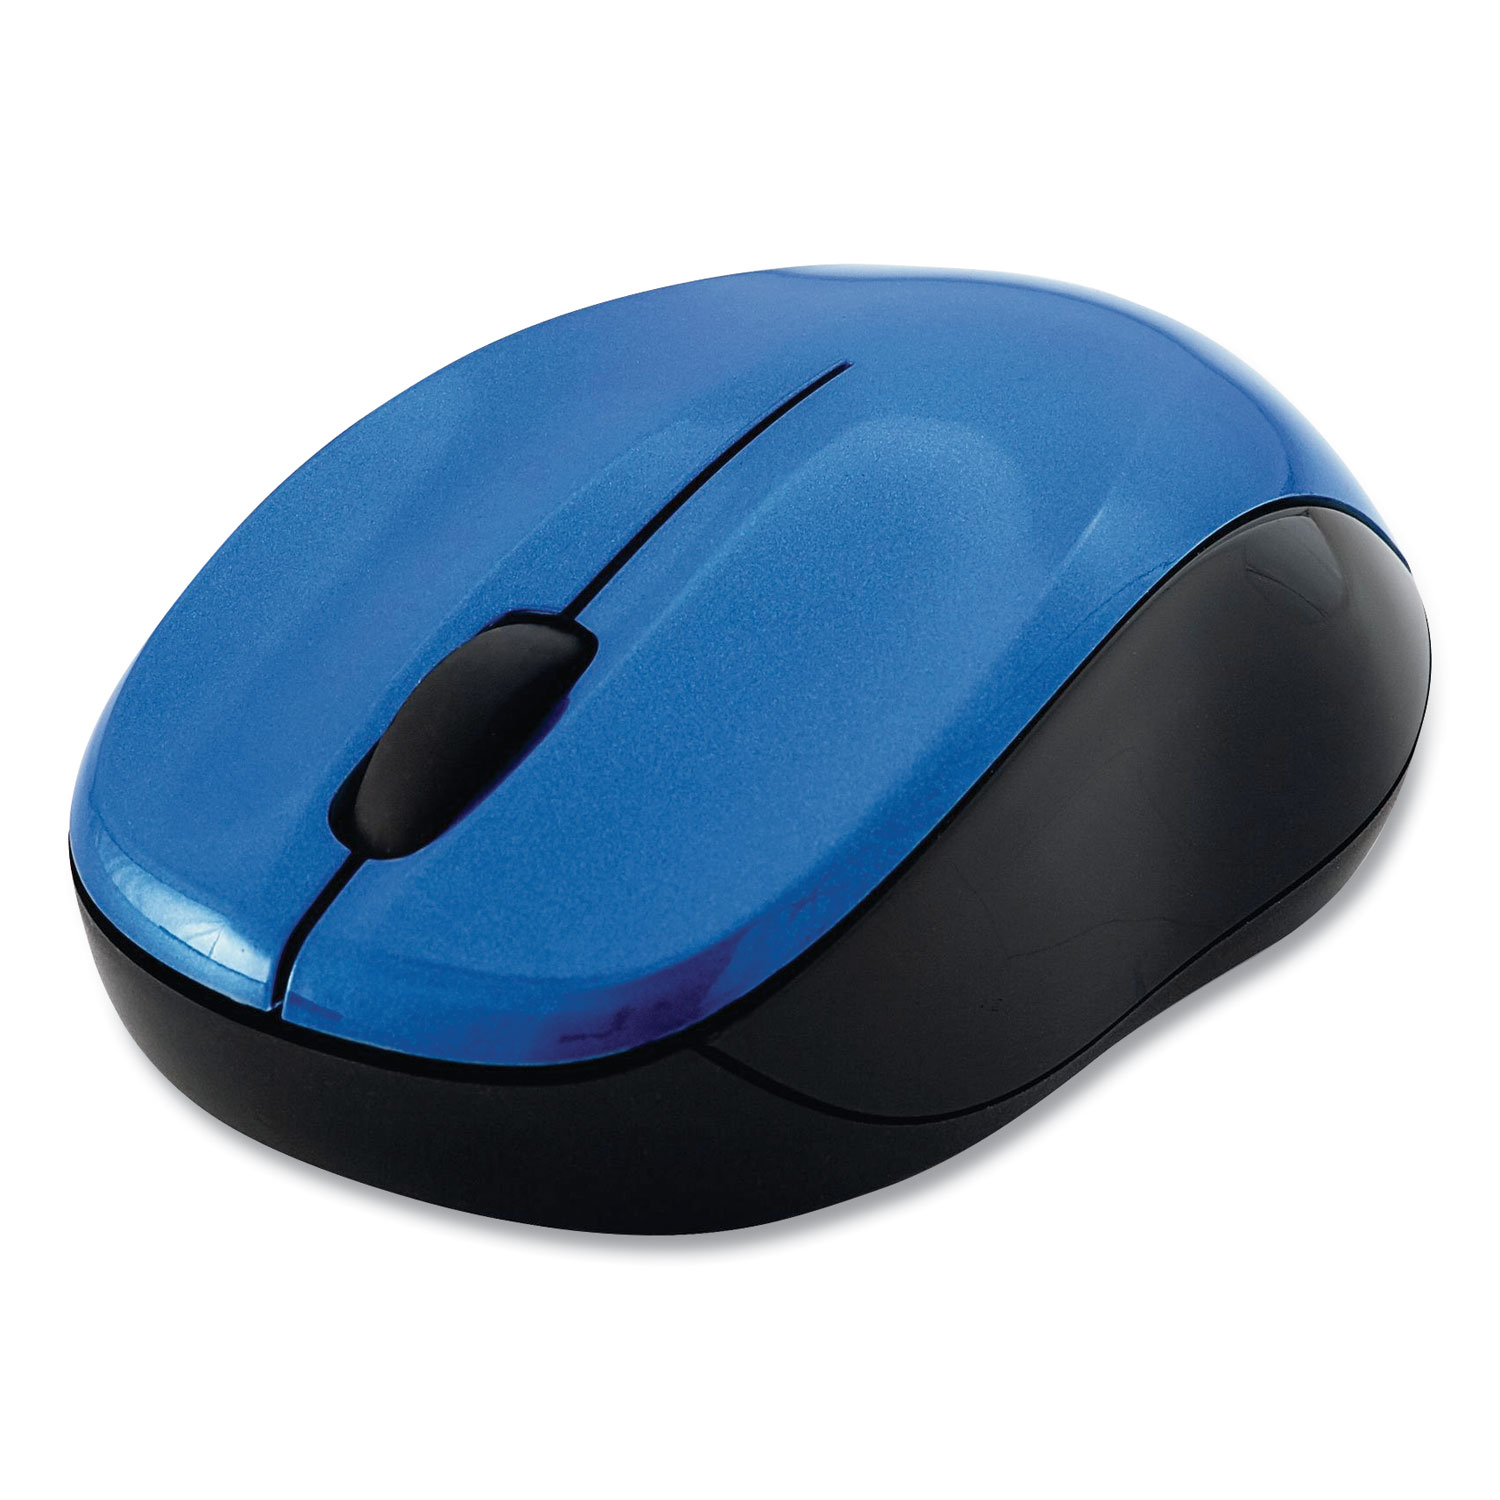  Verbatim 99770 Silent Wireless Blue LED Mouse, 2.4 GHz Frequency/32.8 ft Wireless Range, Left/Right Hand Use, Blue (VER99770) 